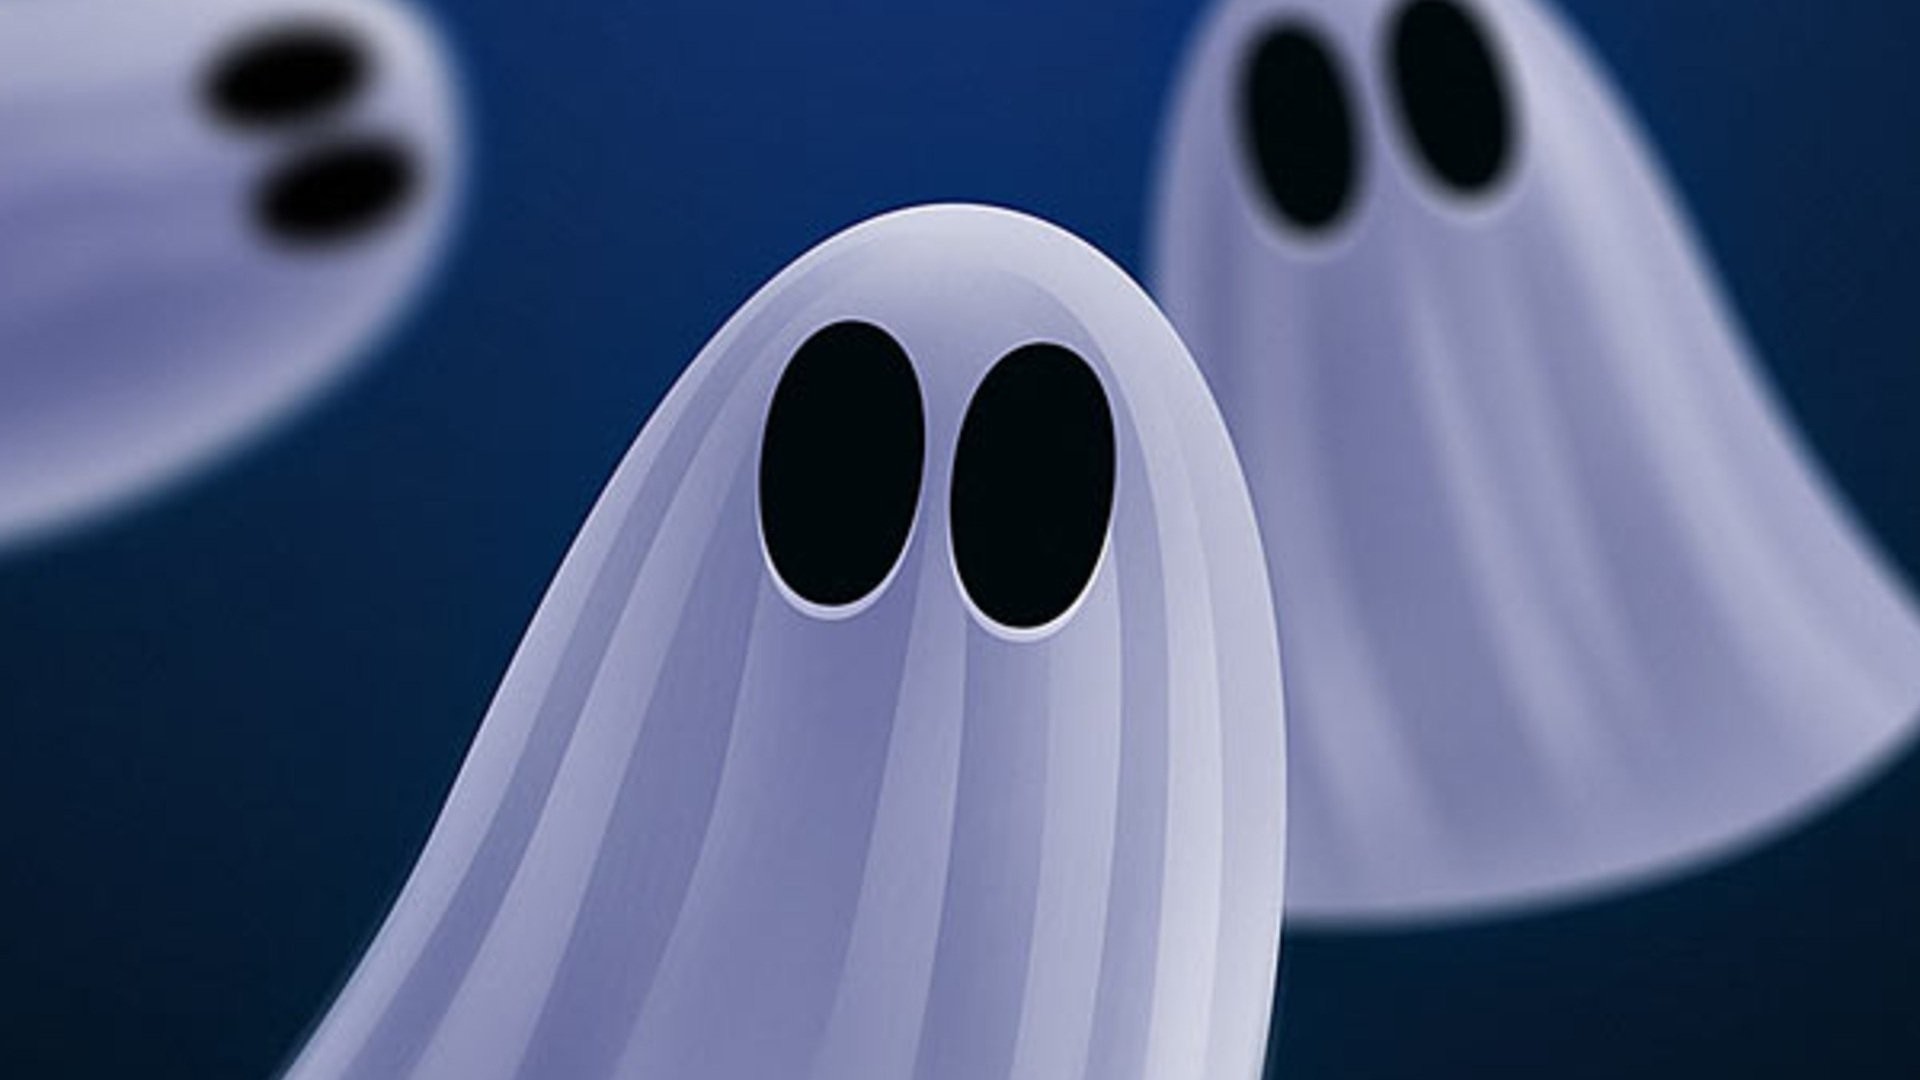 Cute Ghost Wallpaper (67+ images)